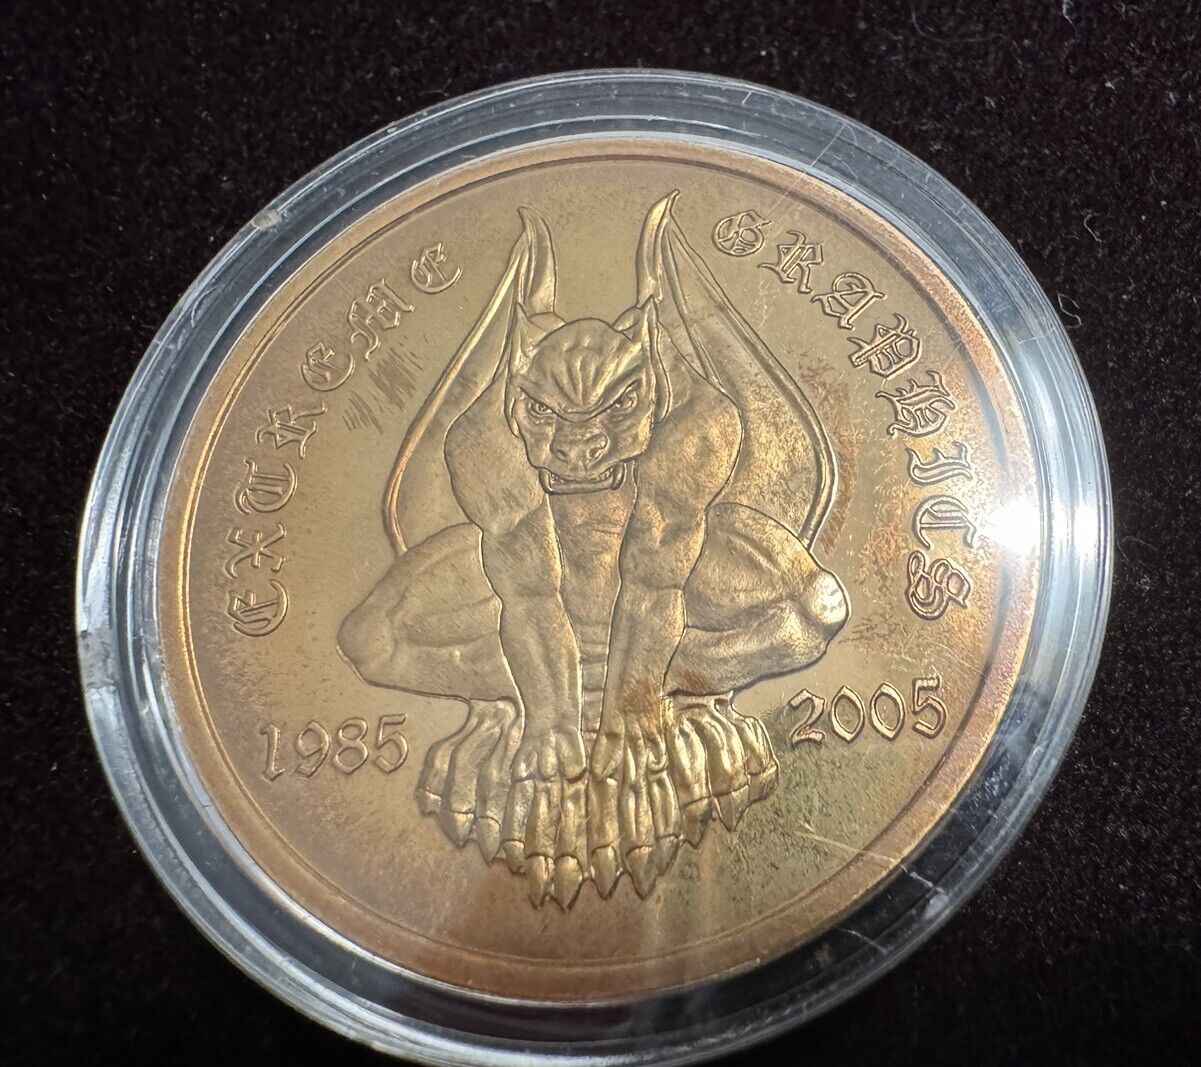 ATI Extreme Graphics 1985-2005 20 Years Of Innovation Gargoyle Coin- RARE FIND